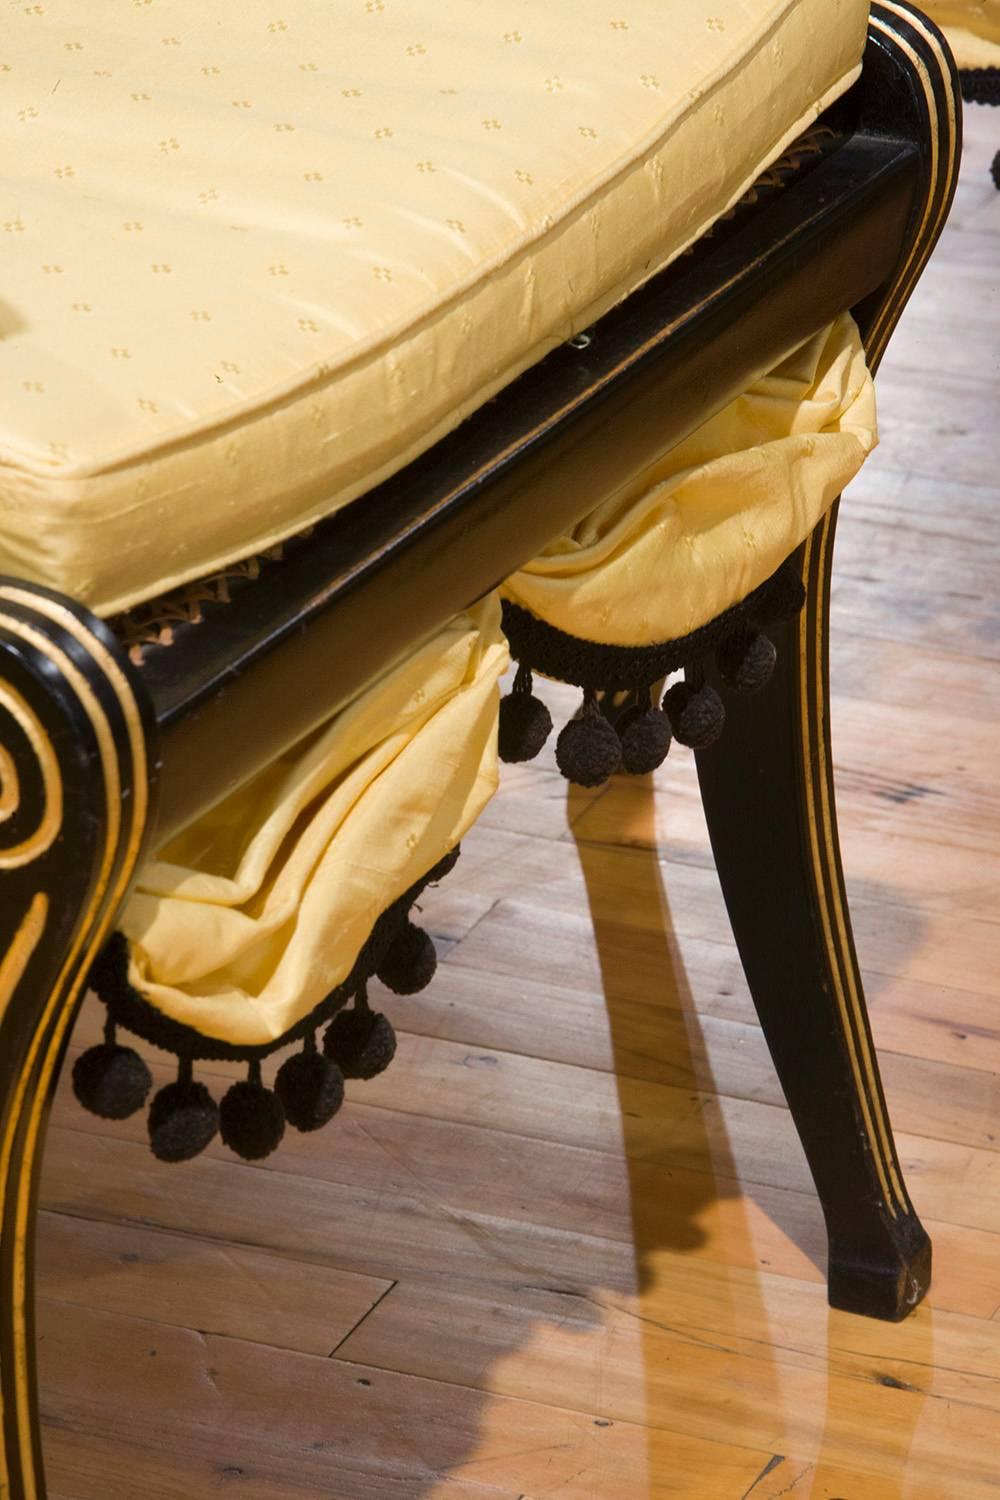 These 19th Century Regency Ebonized Beech open armchairs, with sabre legs. The back support has inlaid gold gilt. Connecting to curved support rails, inlaid with gold gilt bands, leading to the sabre legs. They have matching seat skirts with ball